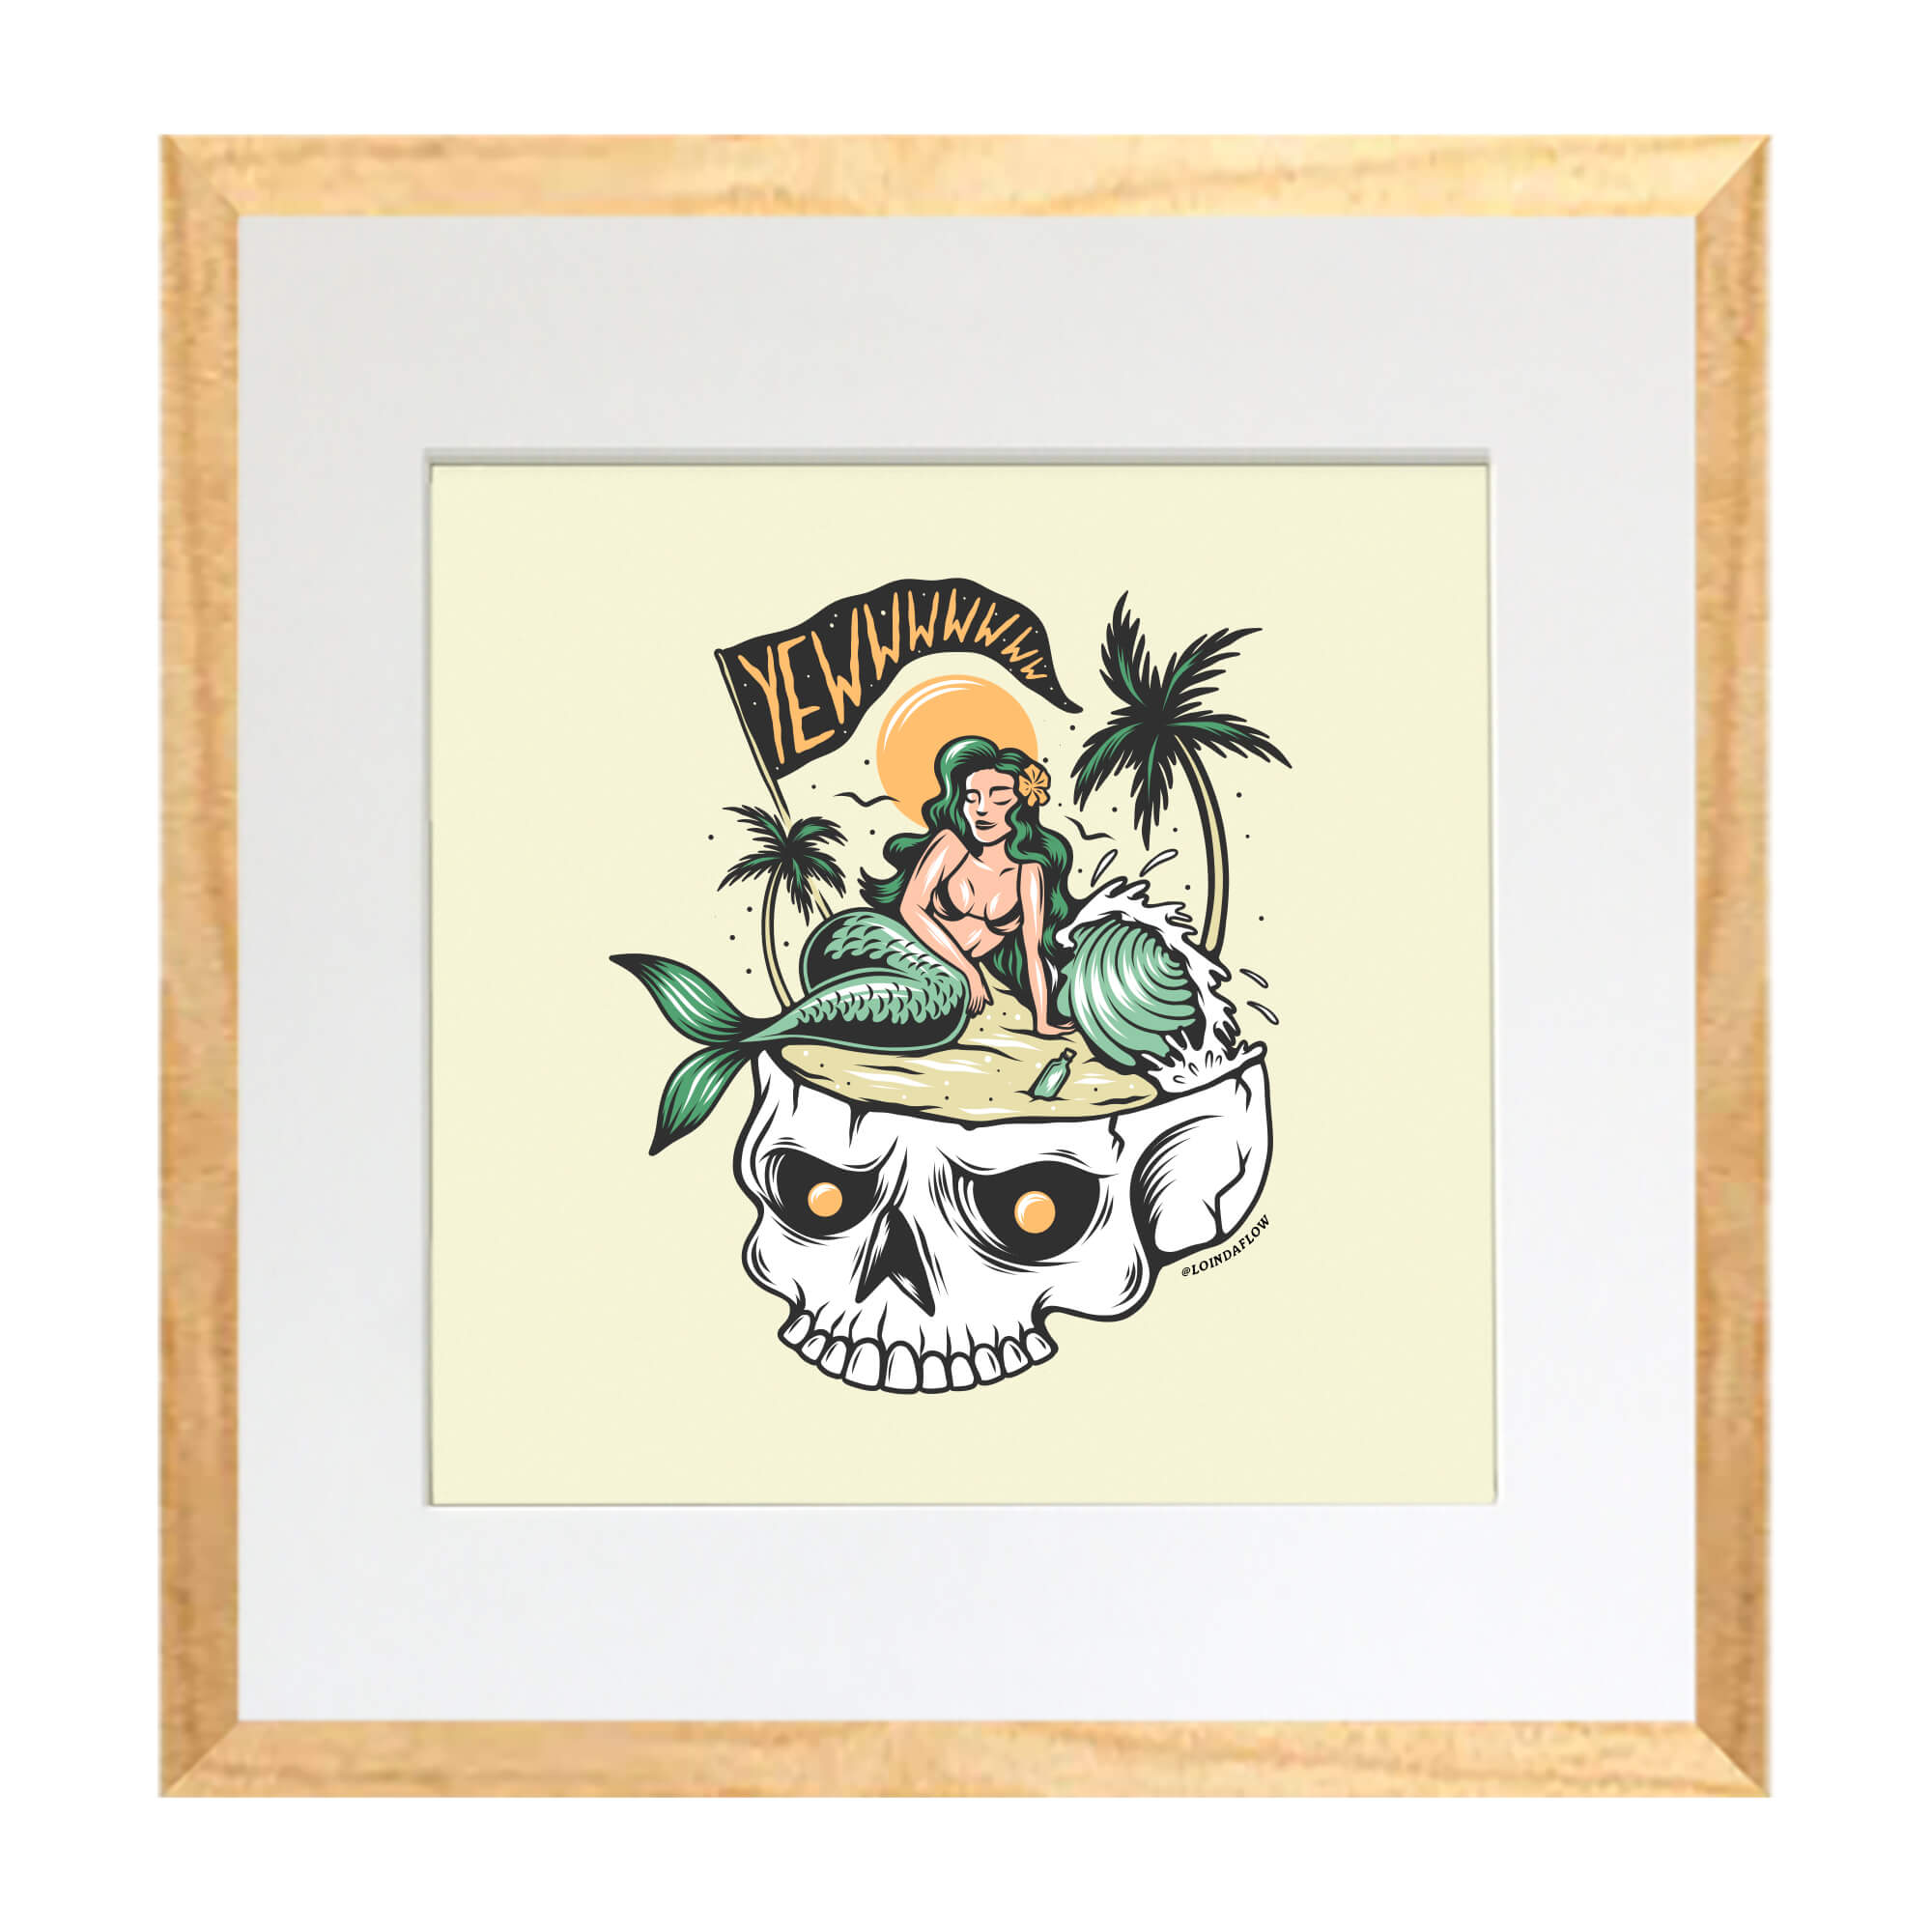 A matted art print with wood frame of a  green tailed mermaid on a skull island by Hawaii artist Laihha Organna